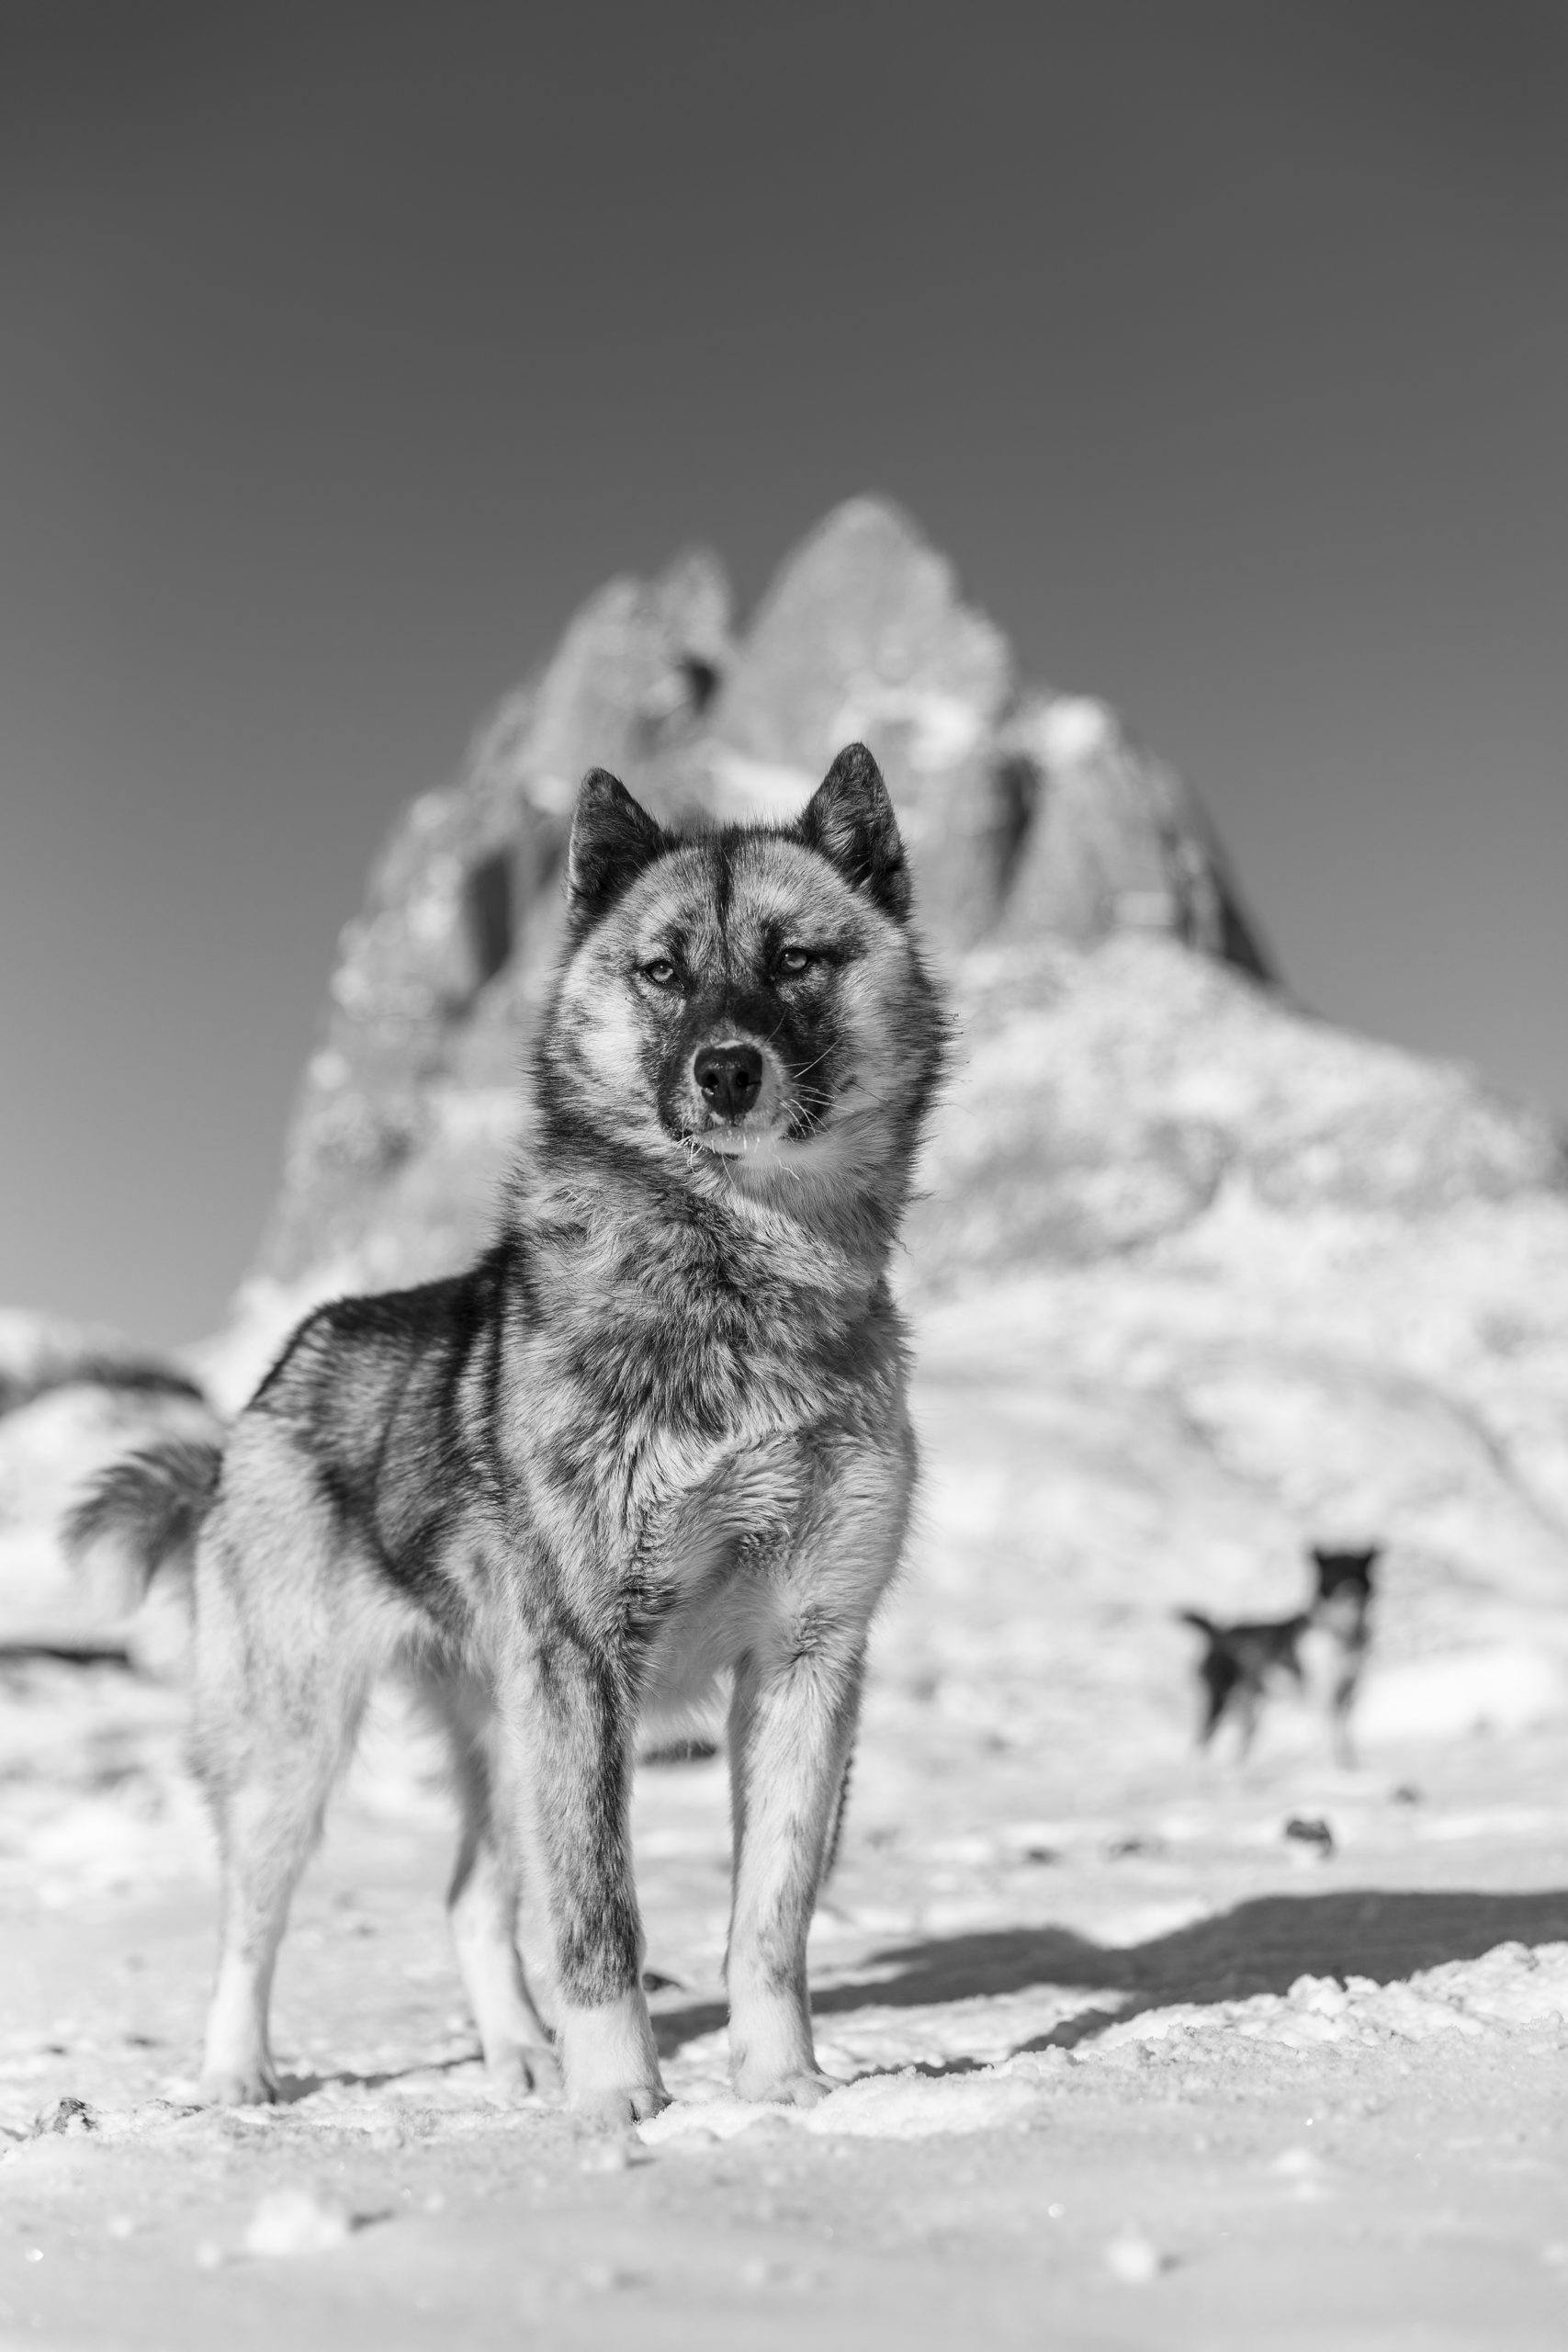 Greenland sled dogs. (Image: Carsten Egevang/Qimmeq)